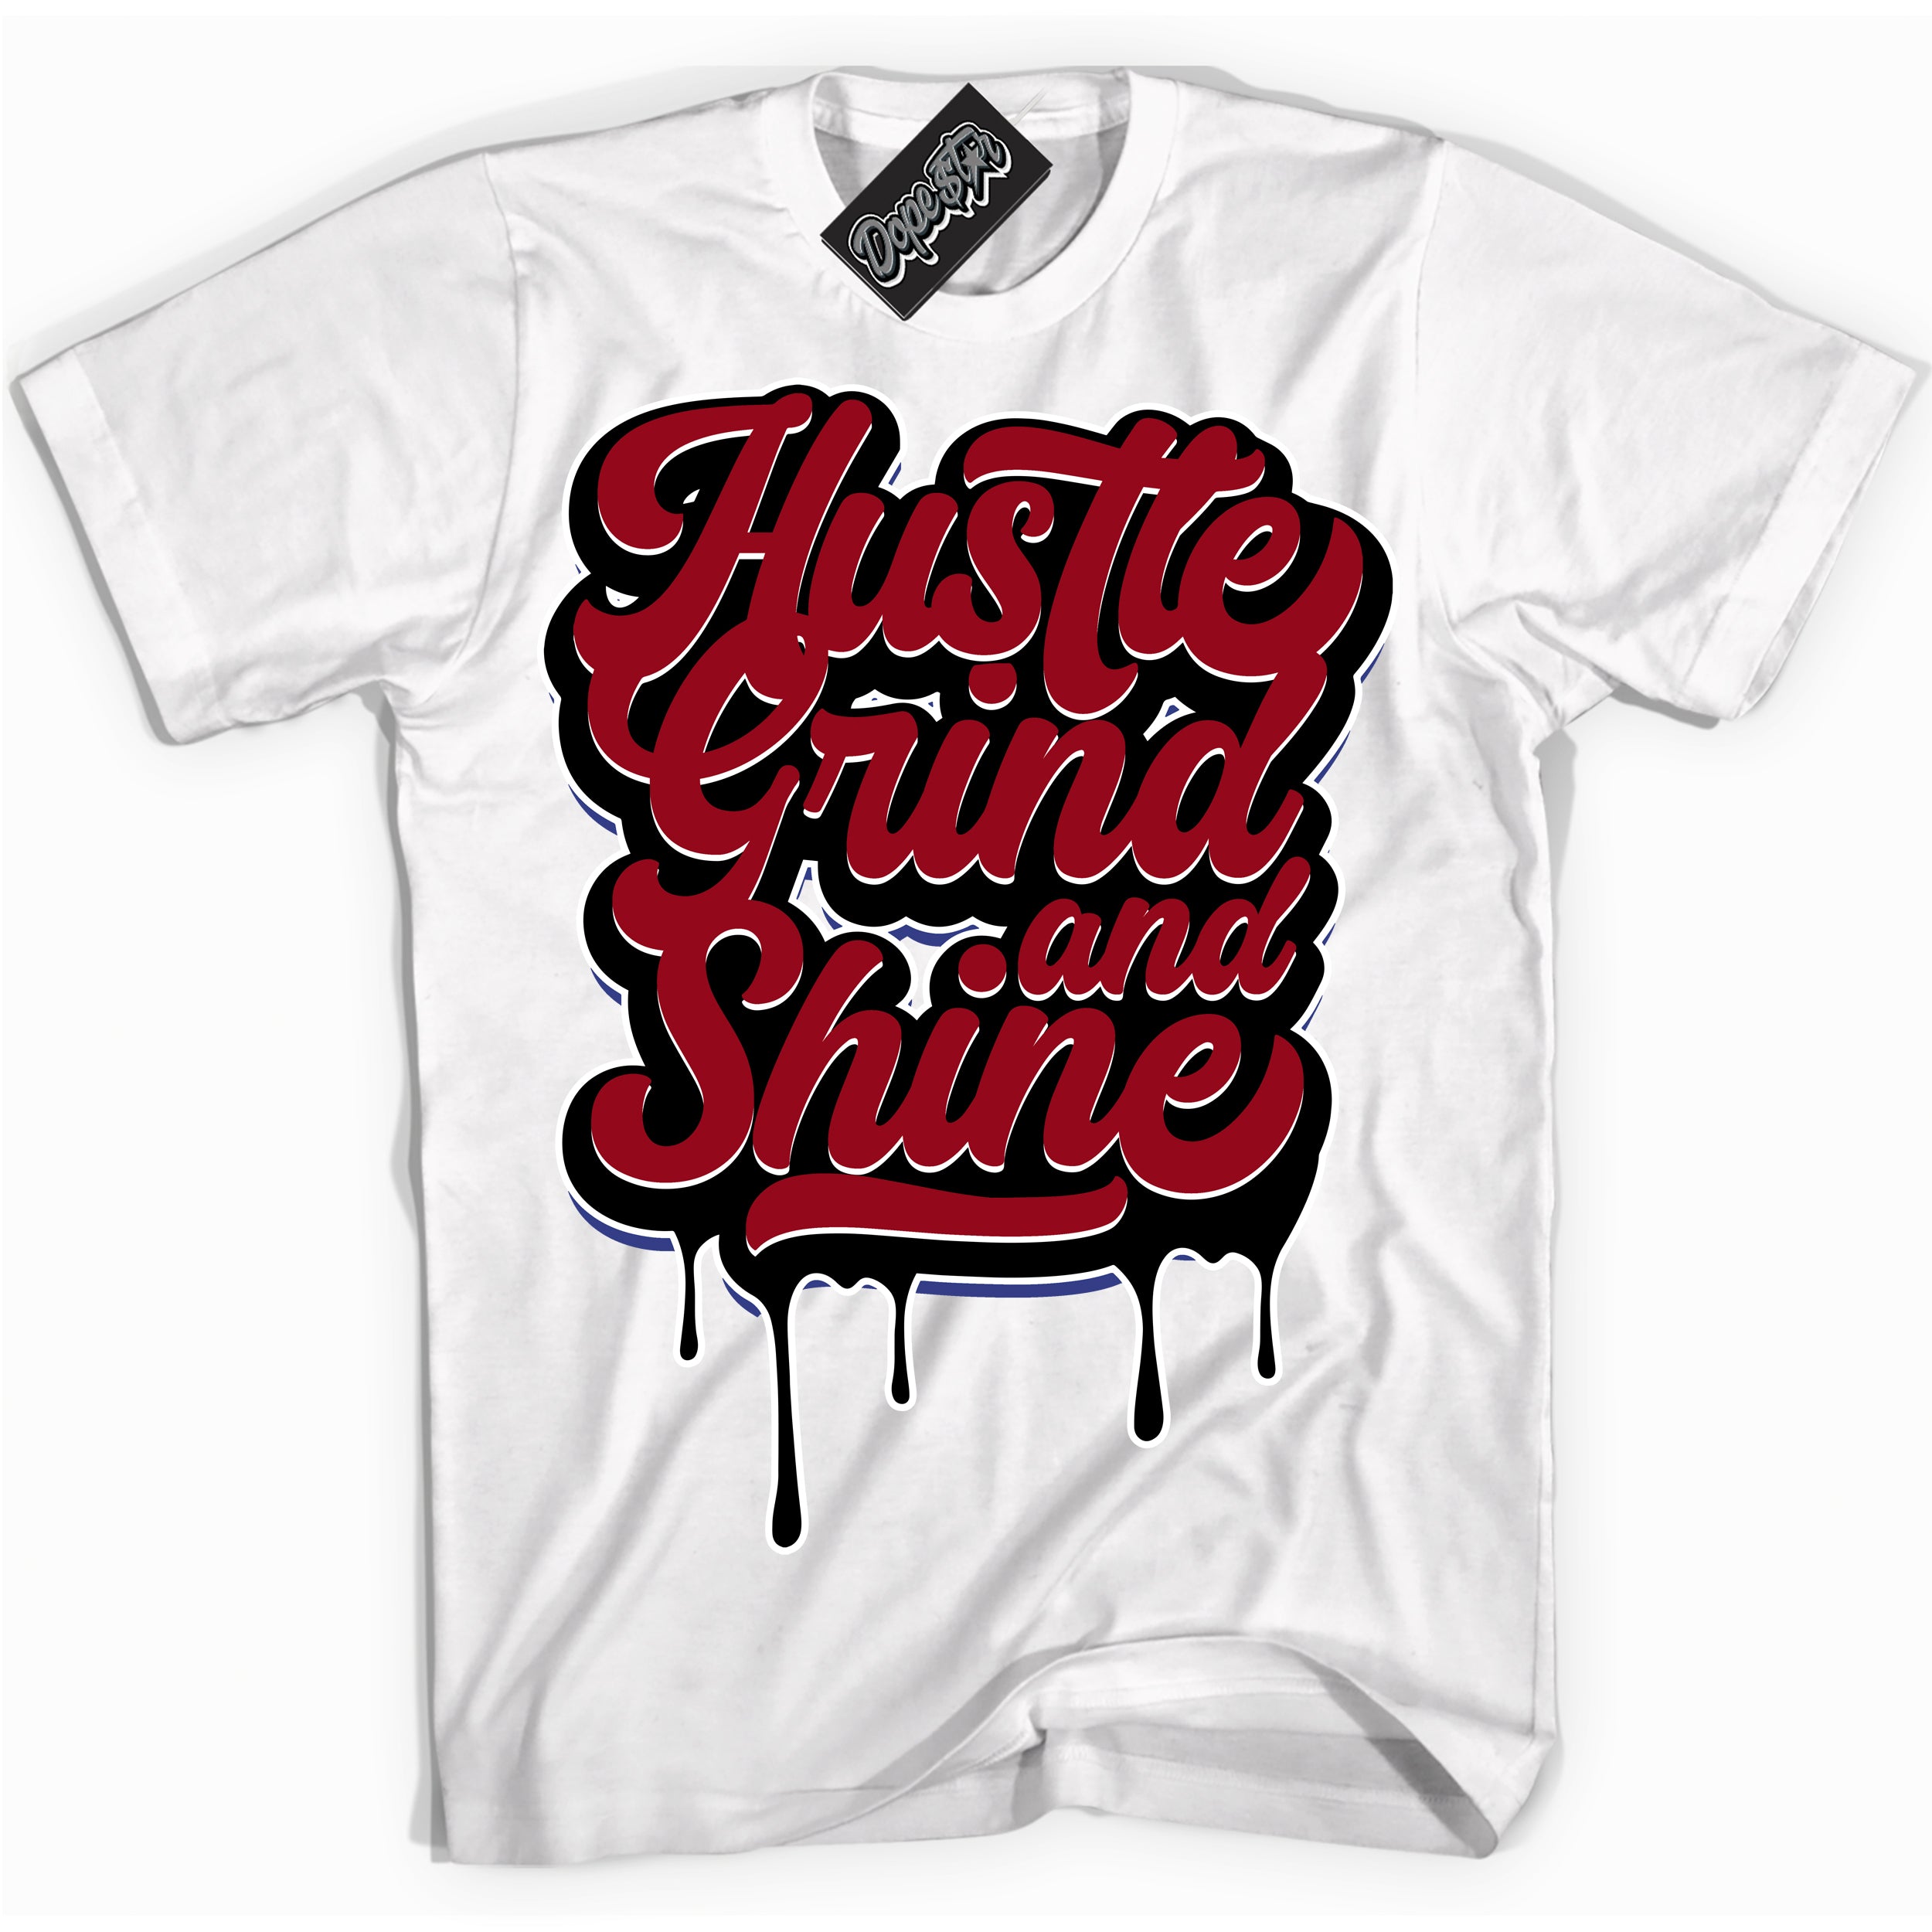 Cool White Shirt with “ Hustle Grind And Shine ” design that perfectly matches Playoffs 8s Sneakers.